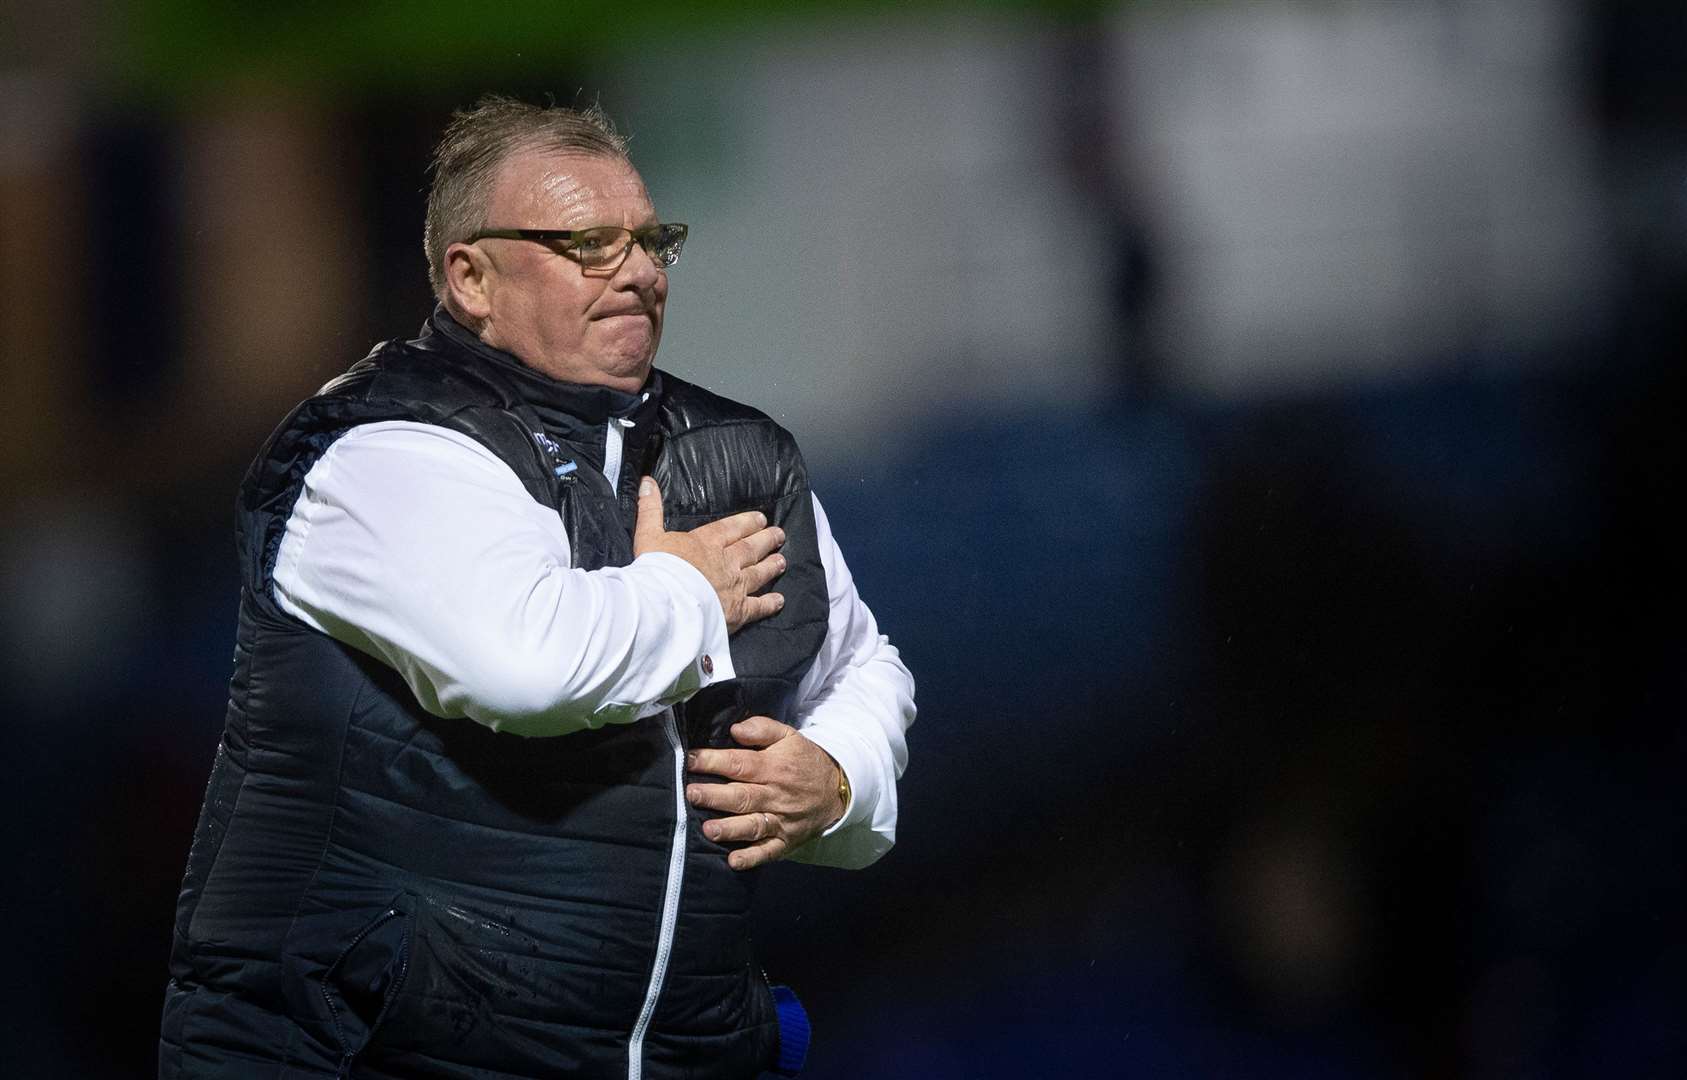 Gillingham manager Steve Evans has praised fans for their help in cleaning up the stadium